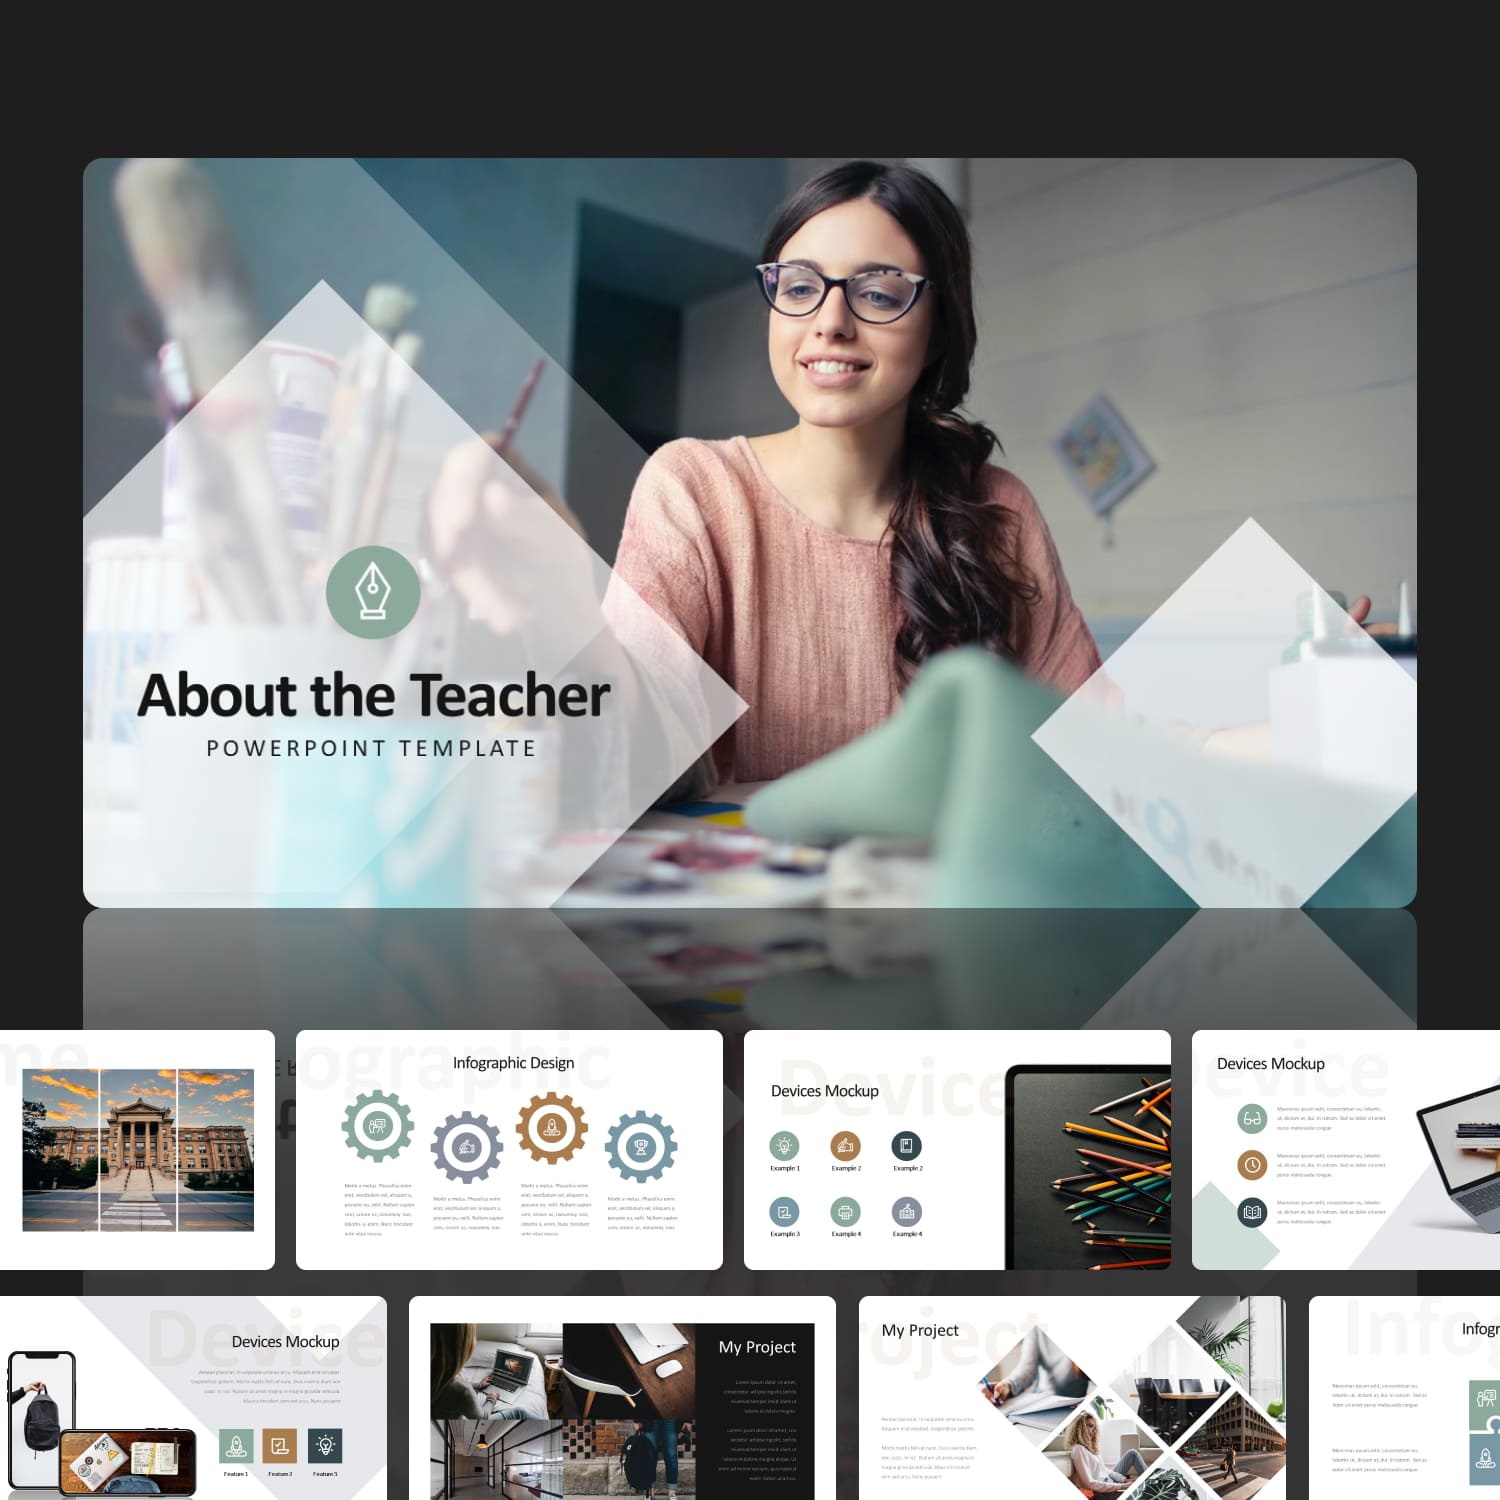 About the Teacher Powerpoint Template.